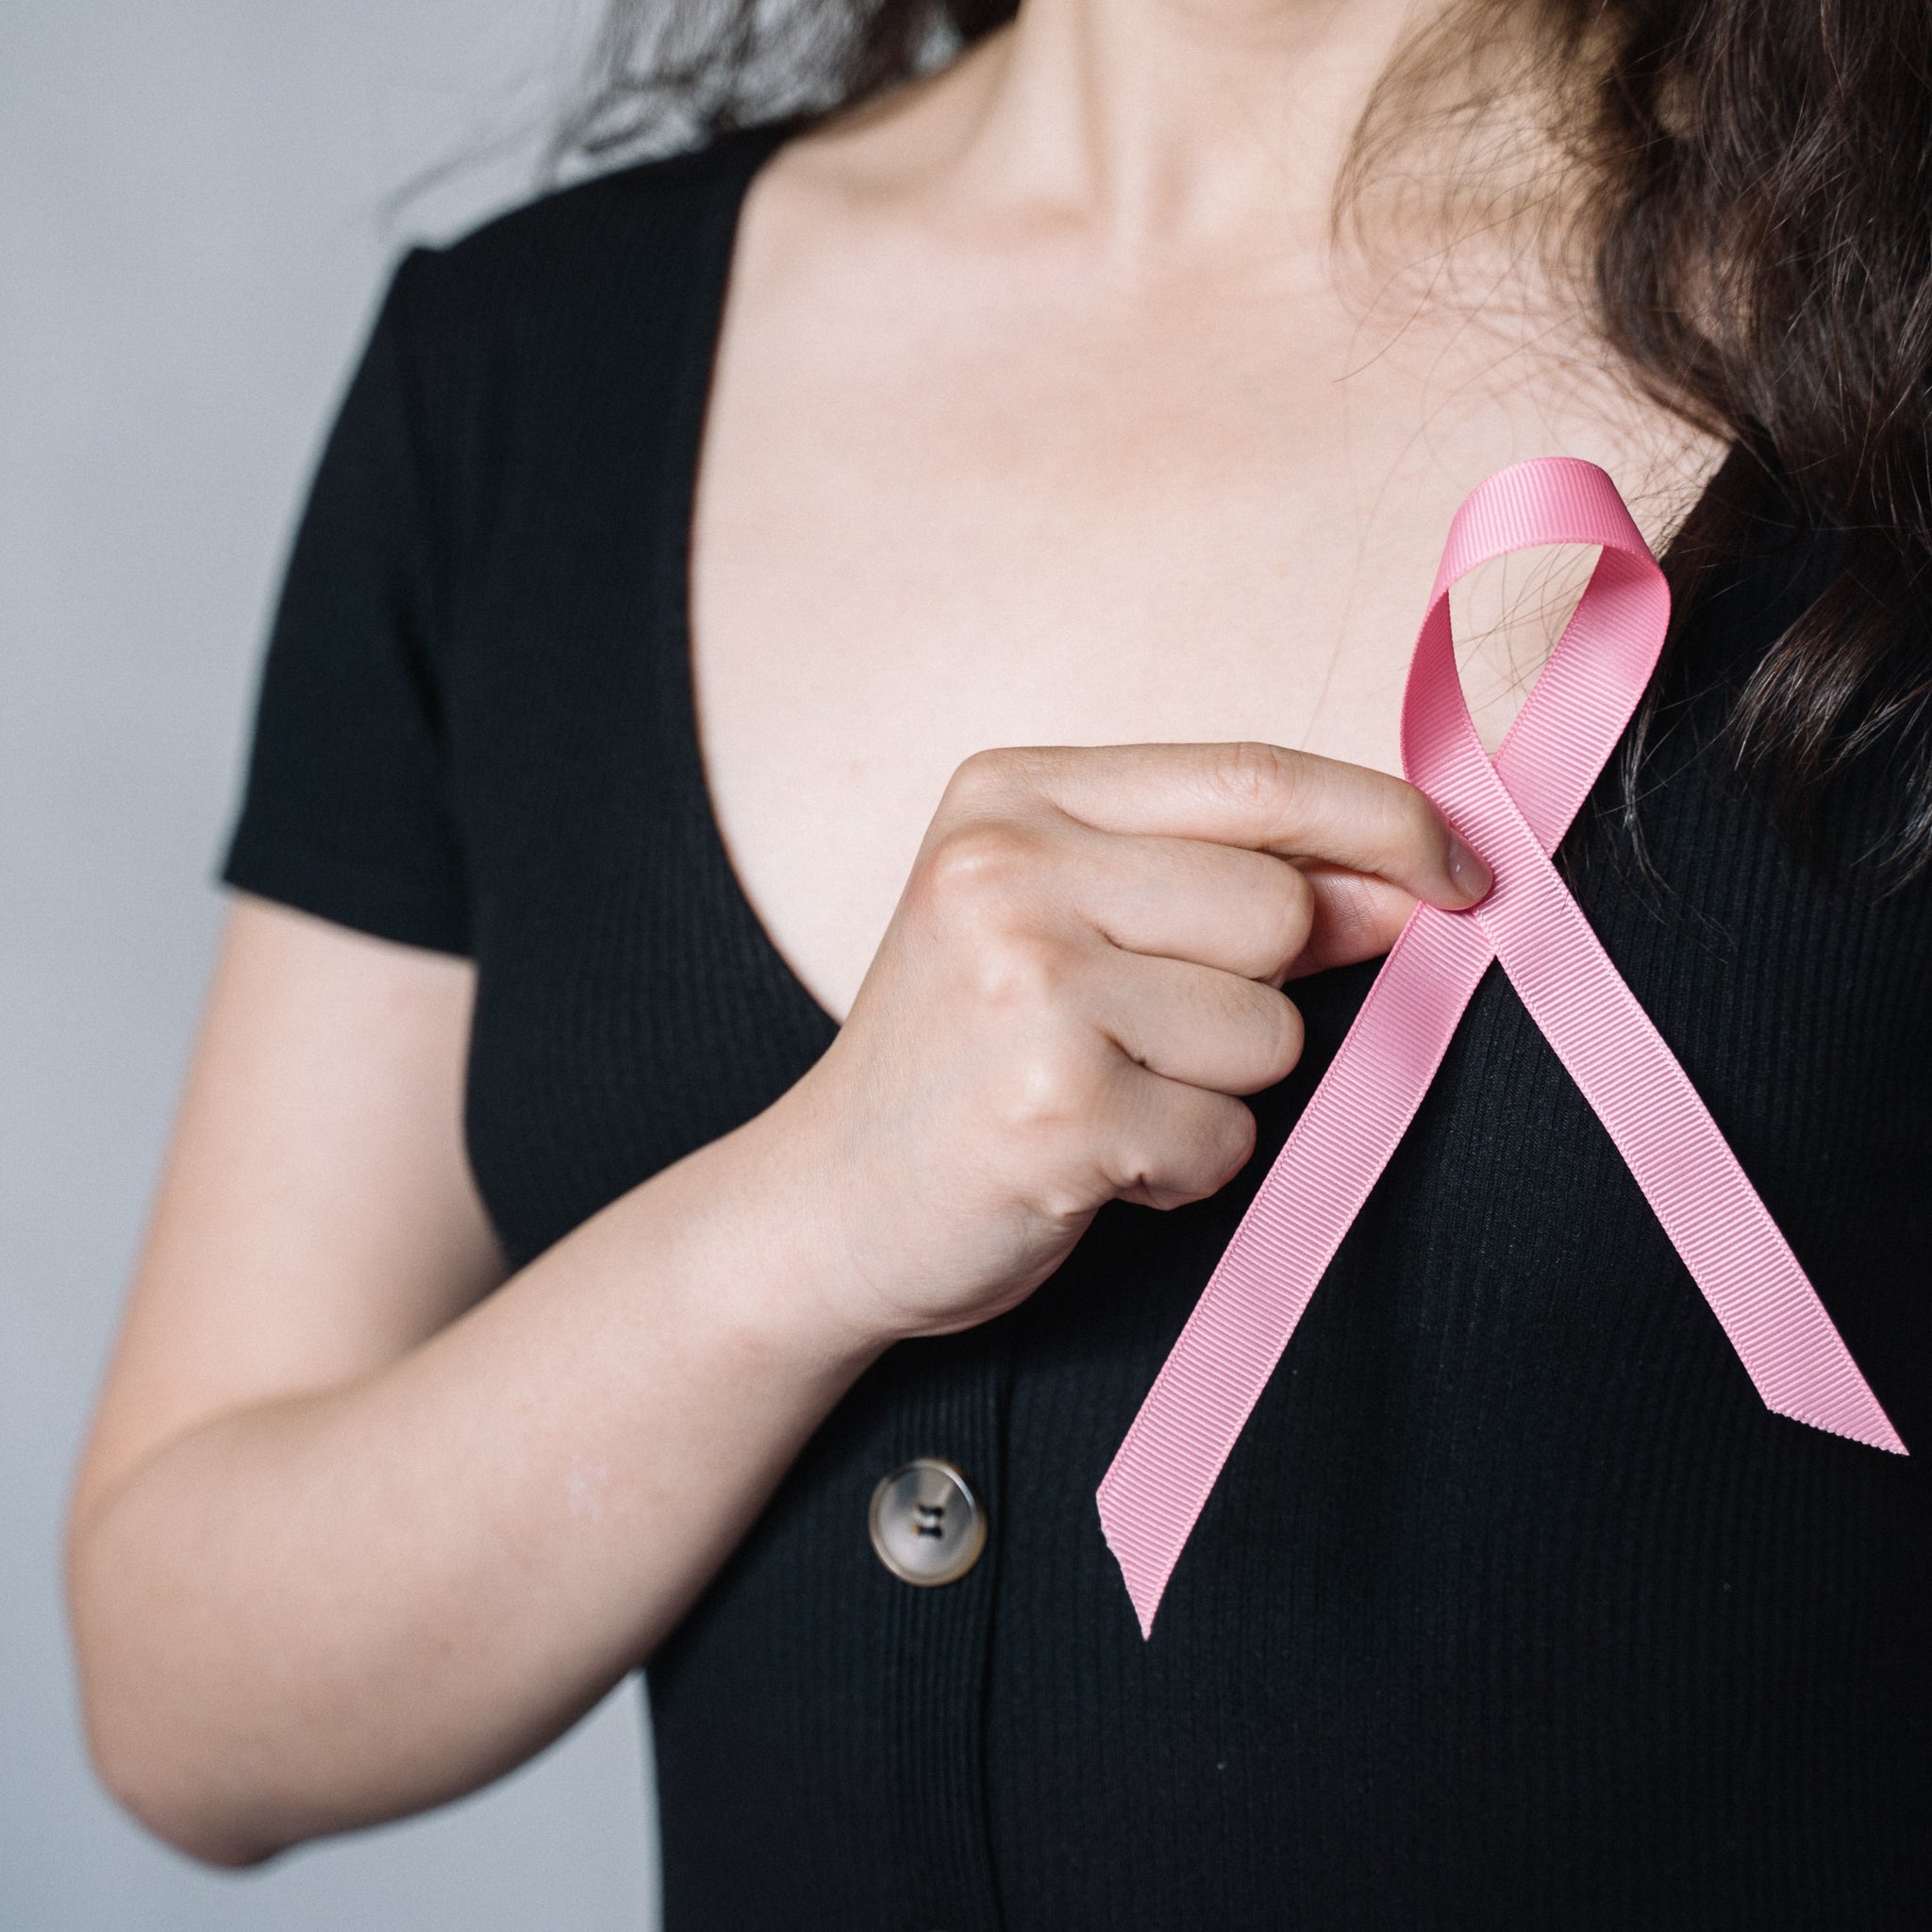 Do Nipple Covers Cause Cancer? Debunking Breast Cancer Myths